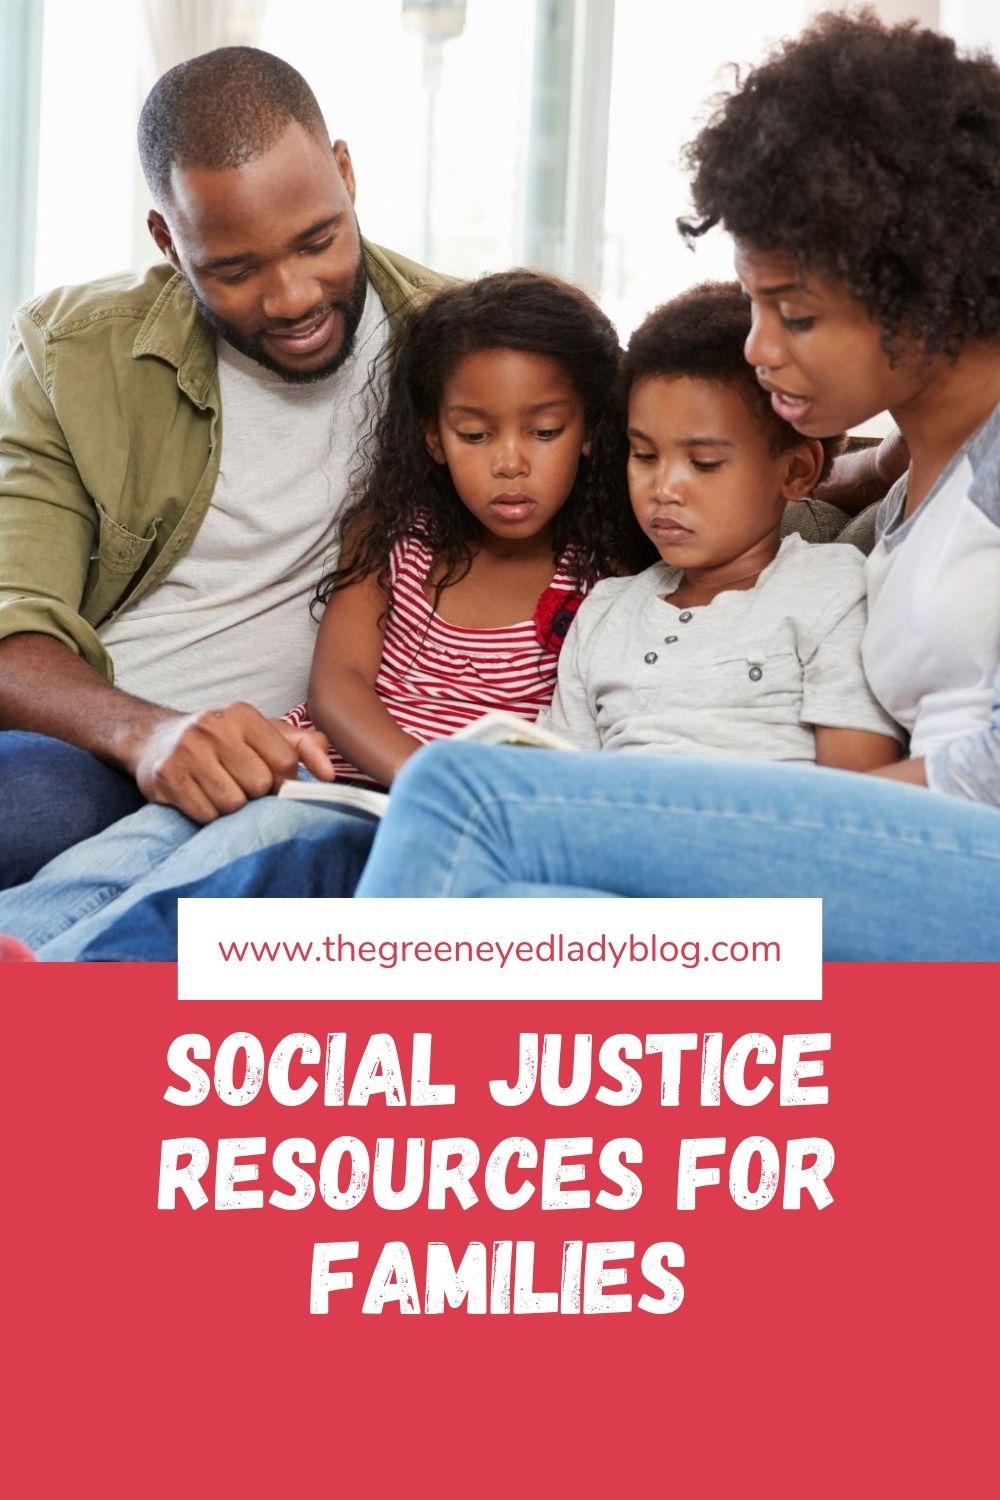 Social Justice Resources for Families